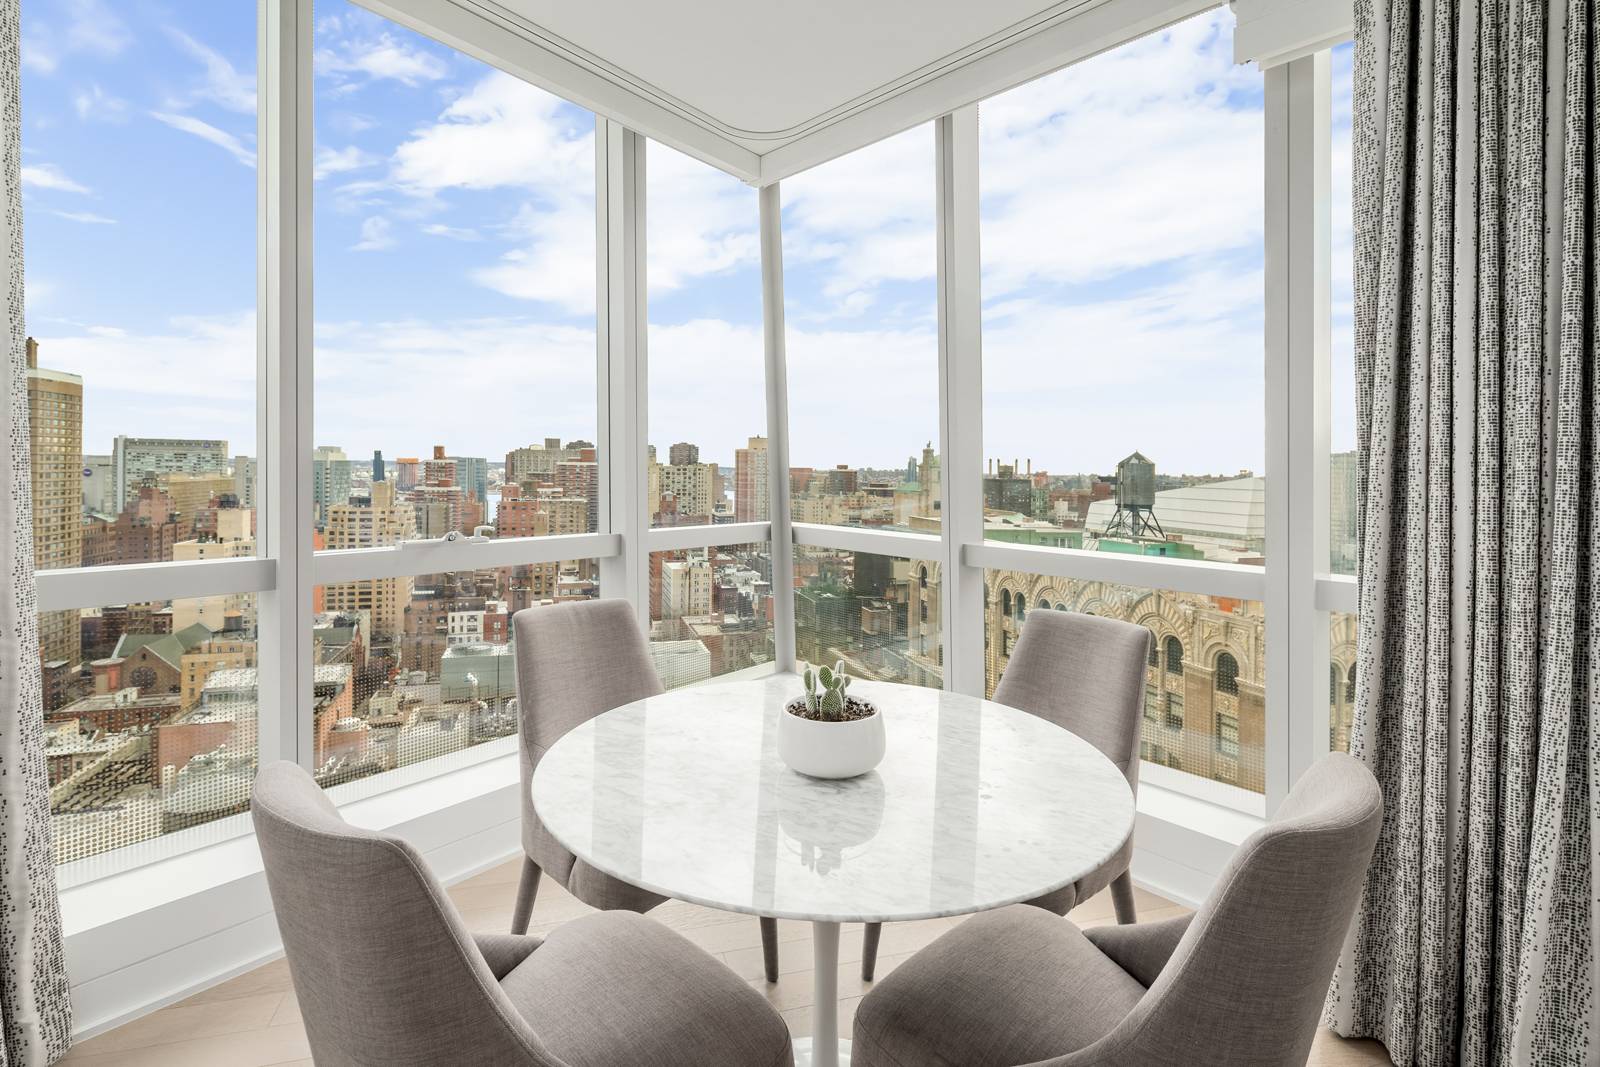 Apartment 24B has unparalleled views in a five star amenity building.